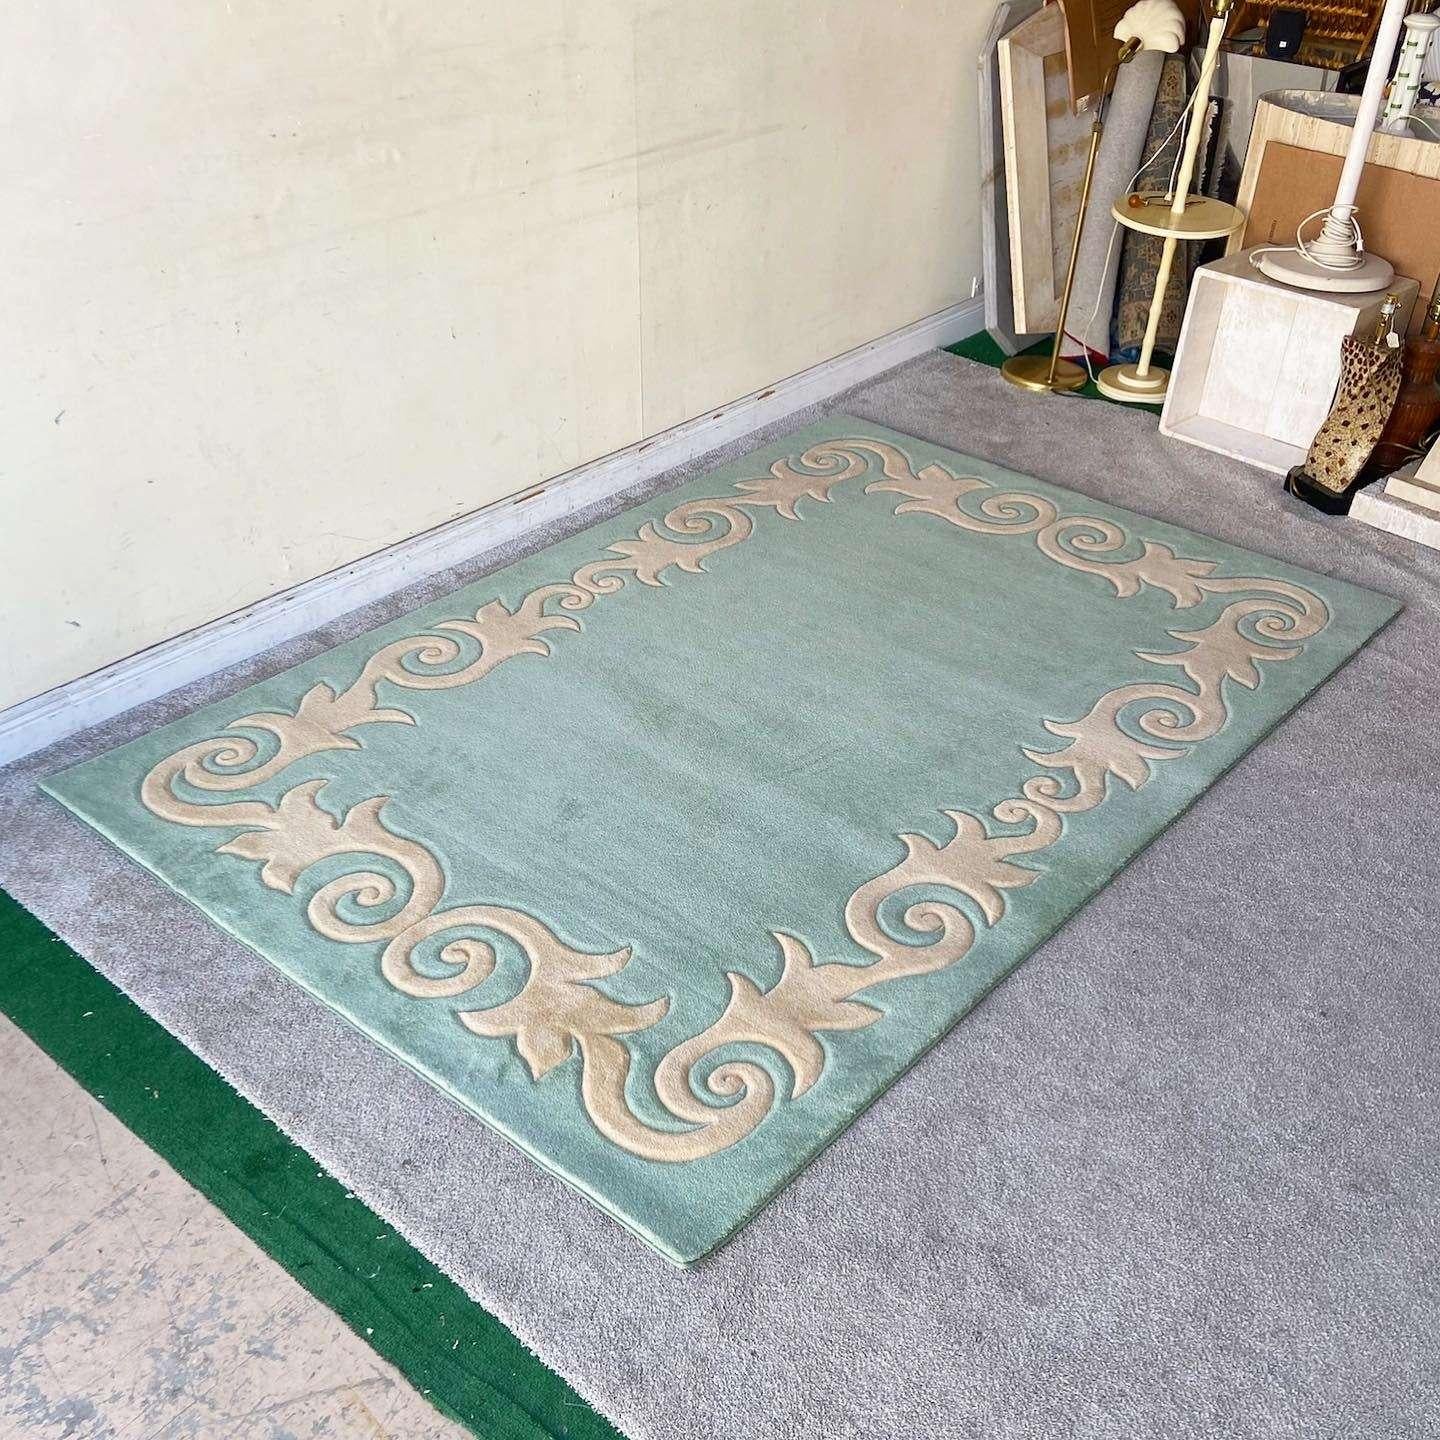 Exceptional vintage postmodern rectangular area rug. Features a light green interior and outer edge with a pink sculpting vining around the edge of the carpet.

Rug 23
